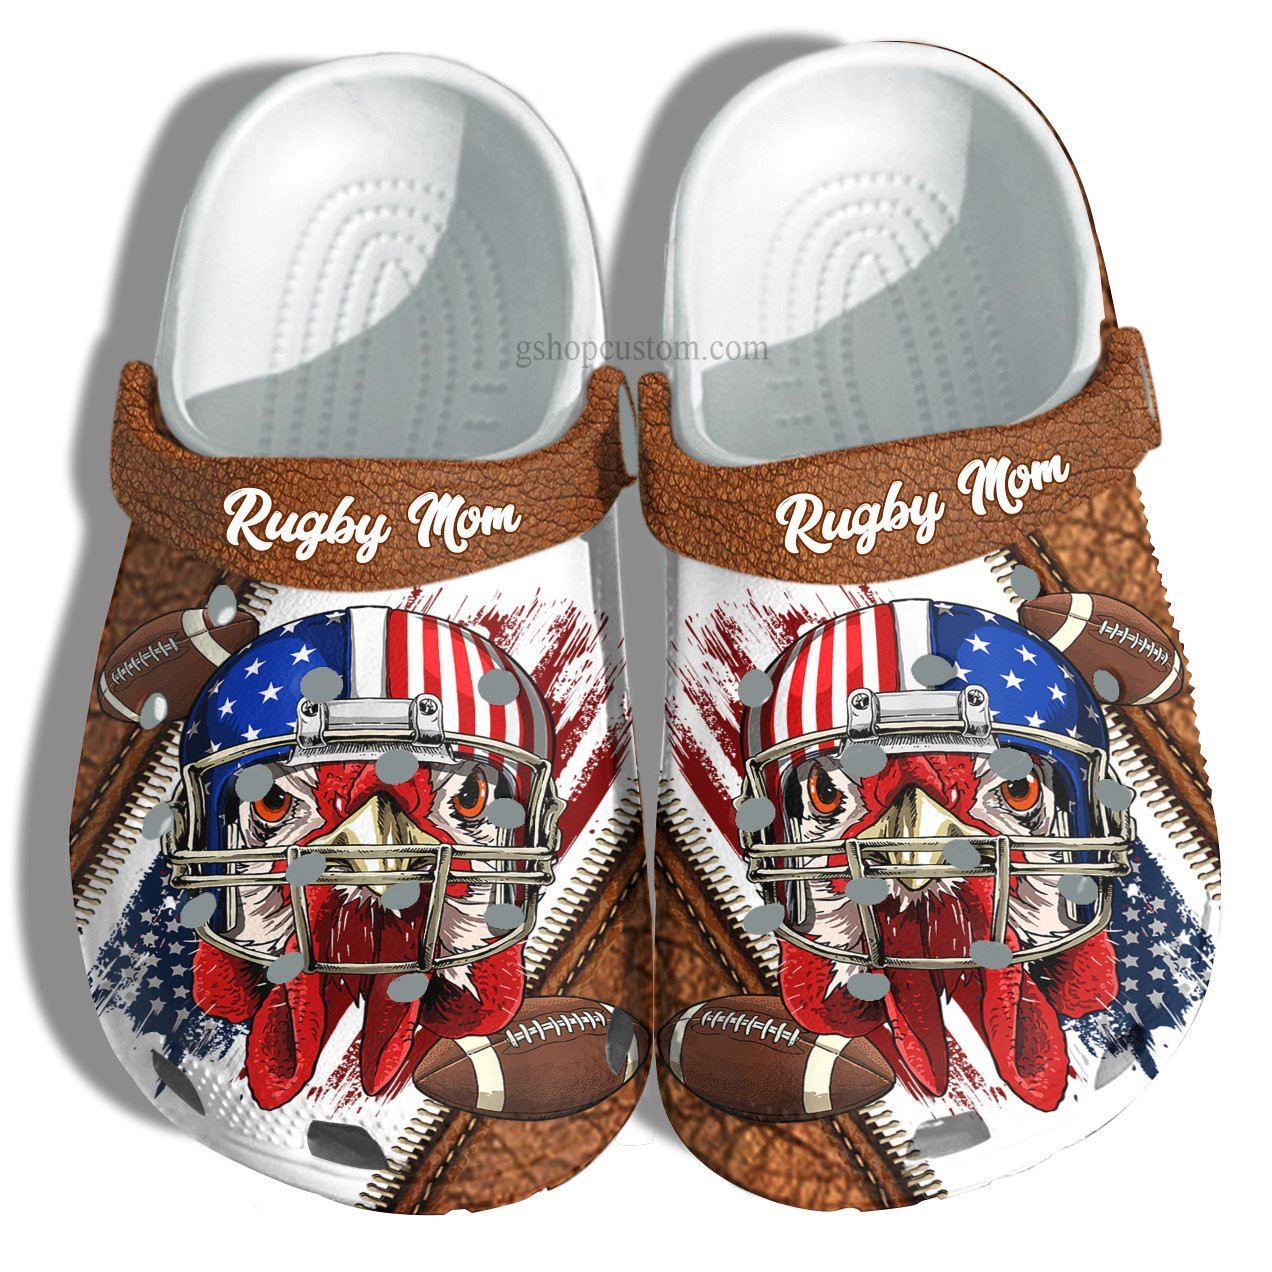 Rugby Chicken America Flag Croc Shoes Gift Men Women- Football Rugby Usa Flag 4Th Of July Crocs Shoes Customize